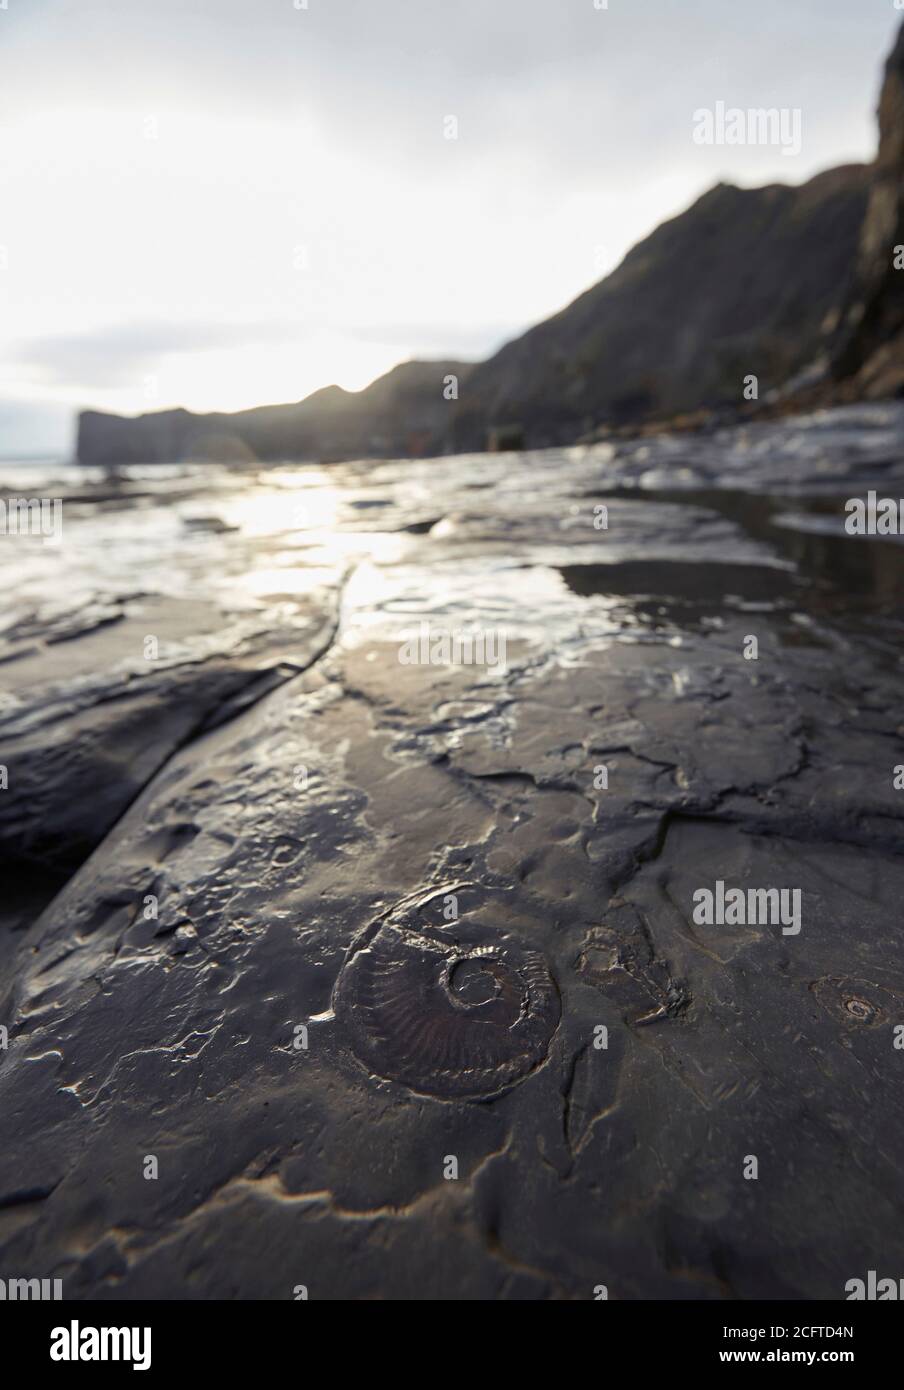 Ammonite fossil in bedrock near Sandend, north of Whitby, North Yorkshire. One of the best places on the east coast to go fossil hunting. Stock Photo